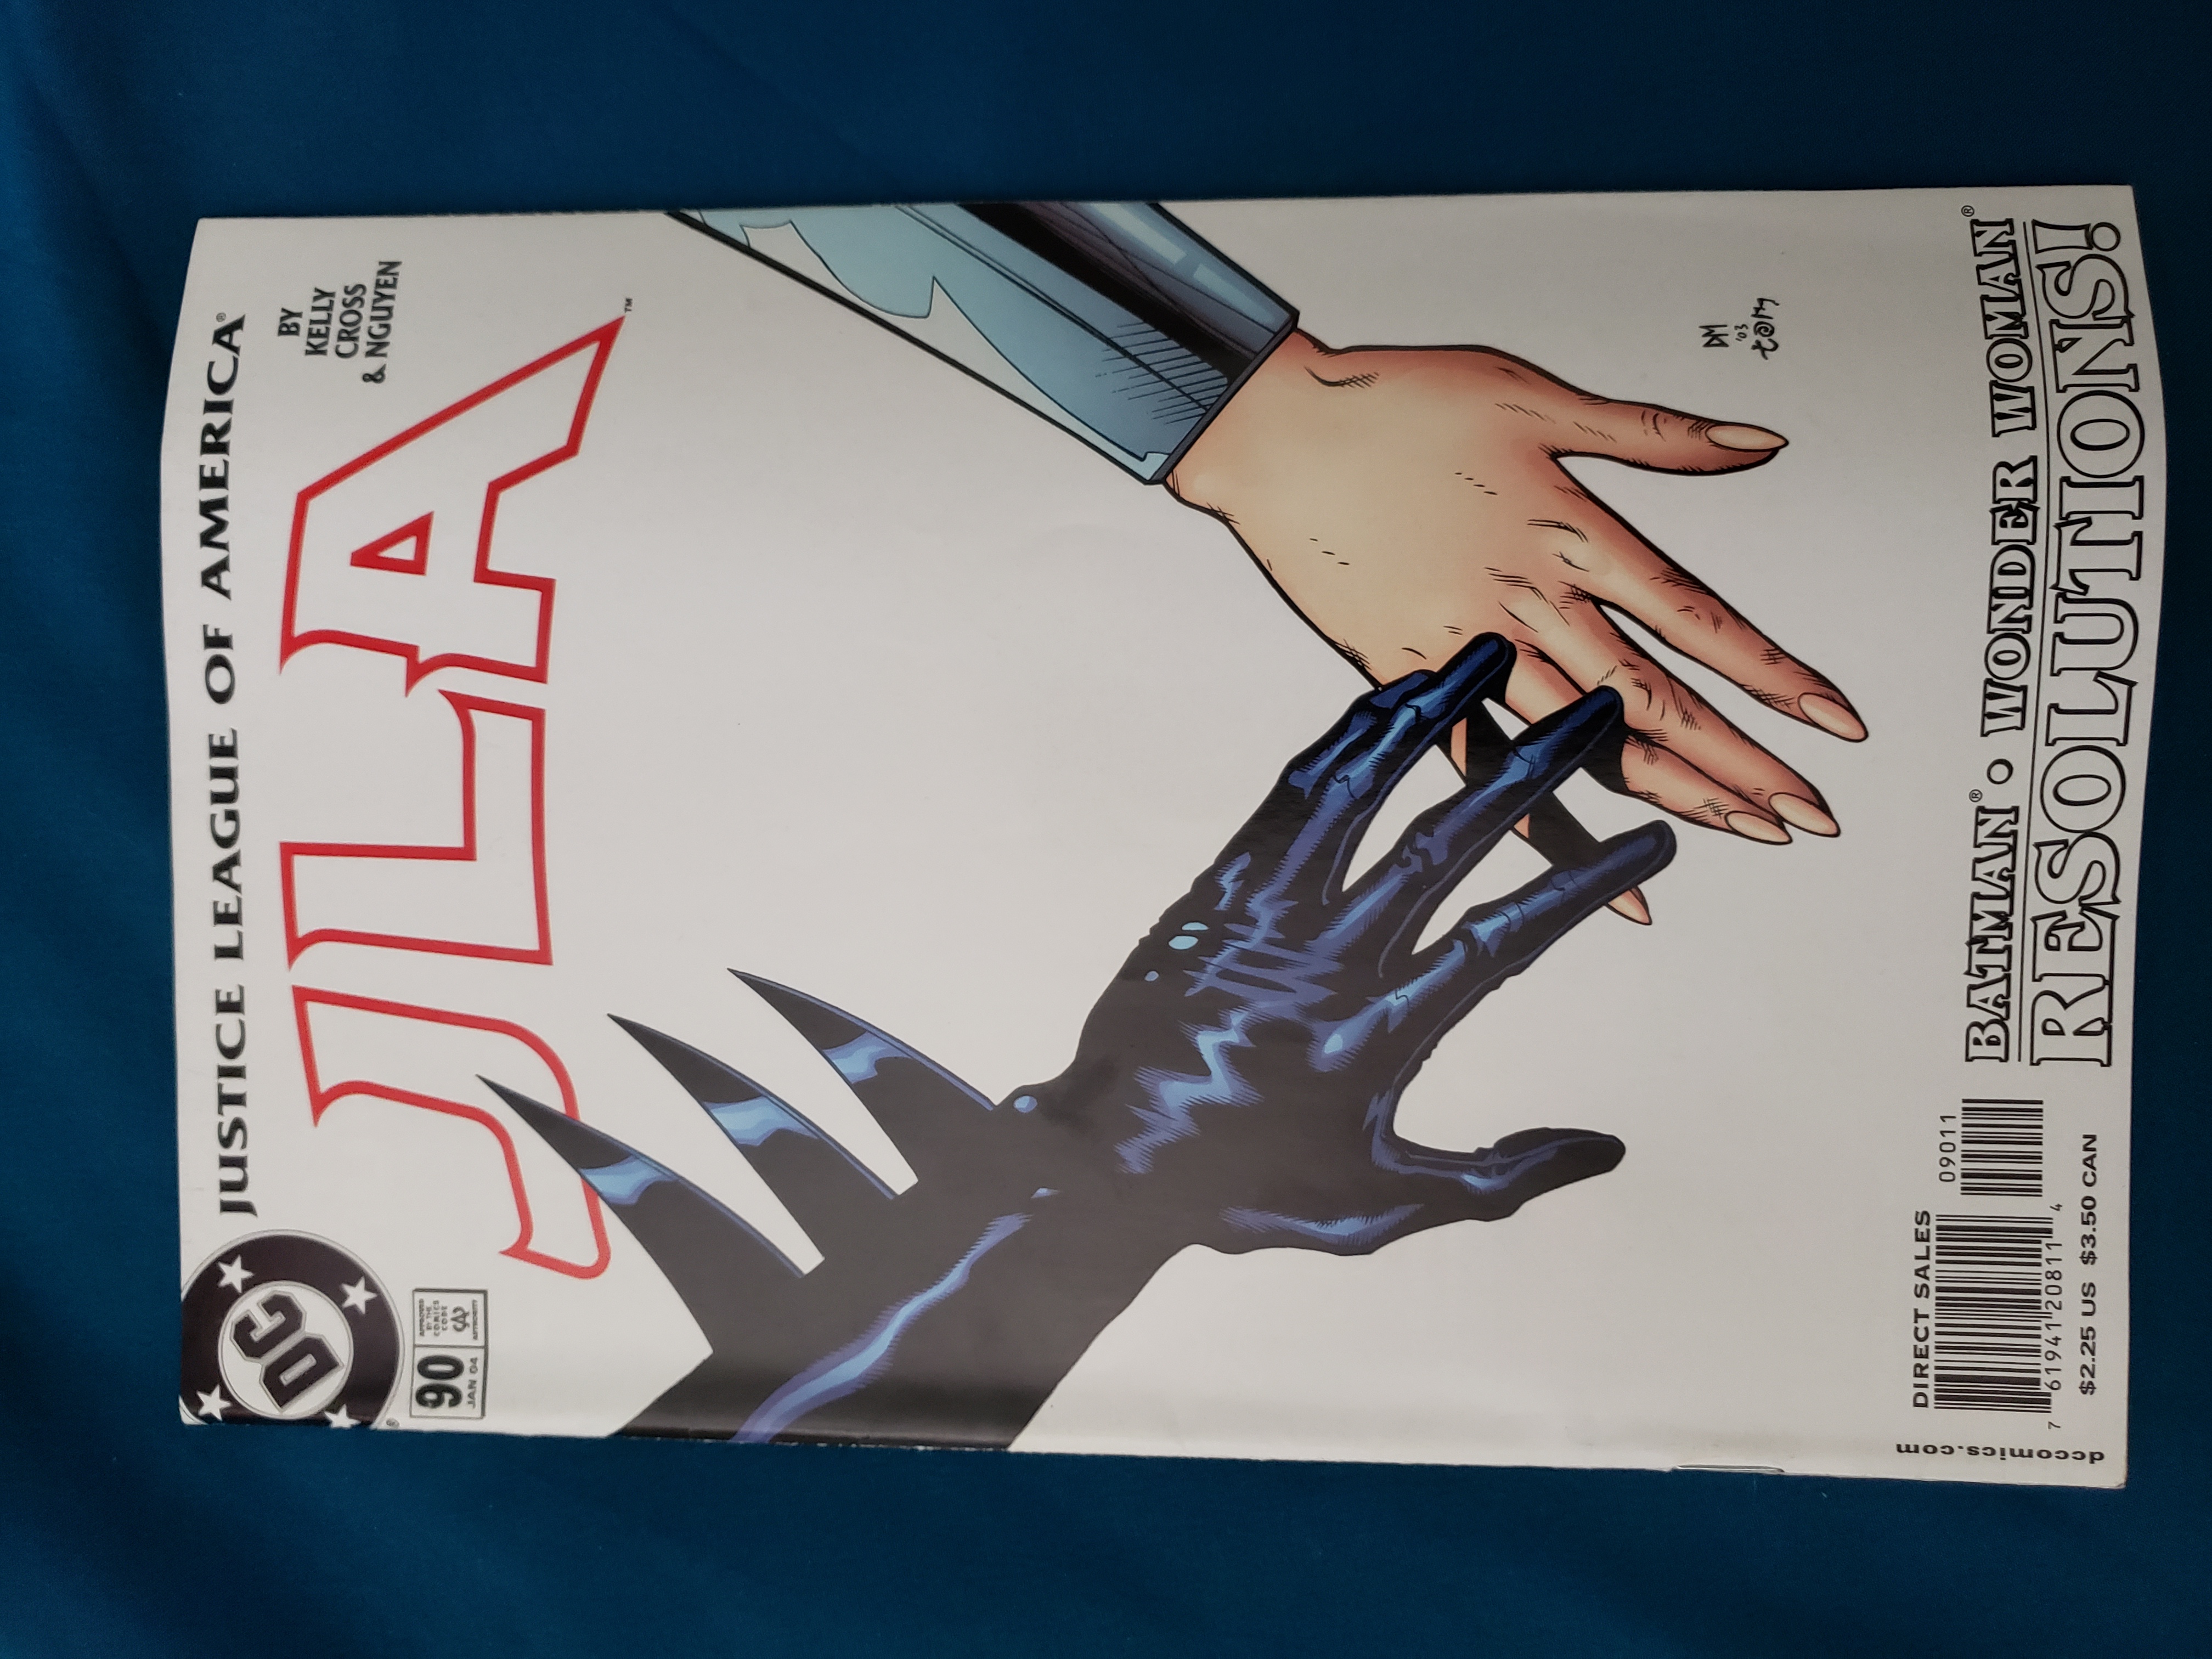 image of a comic book